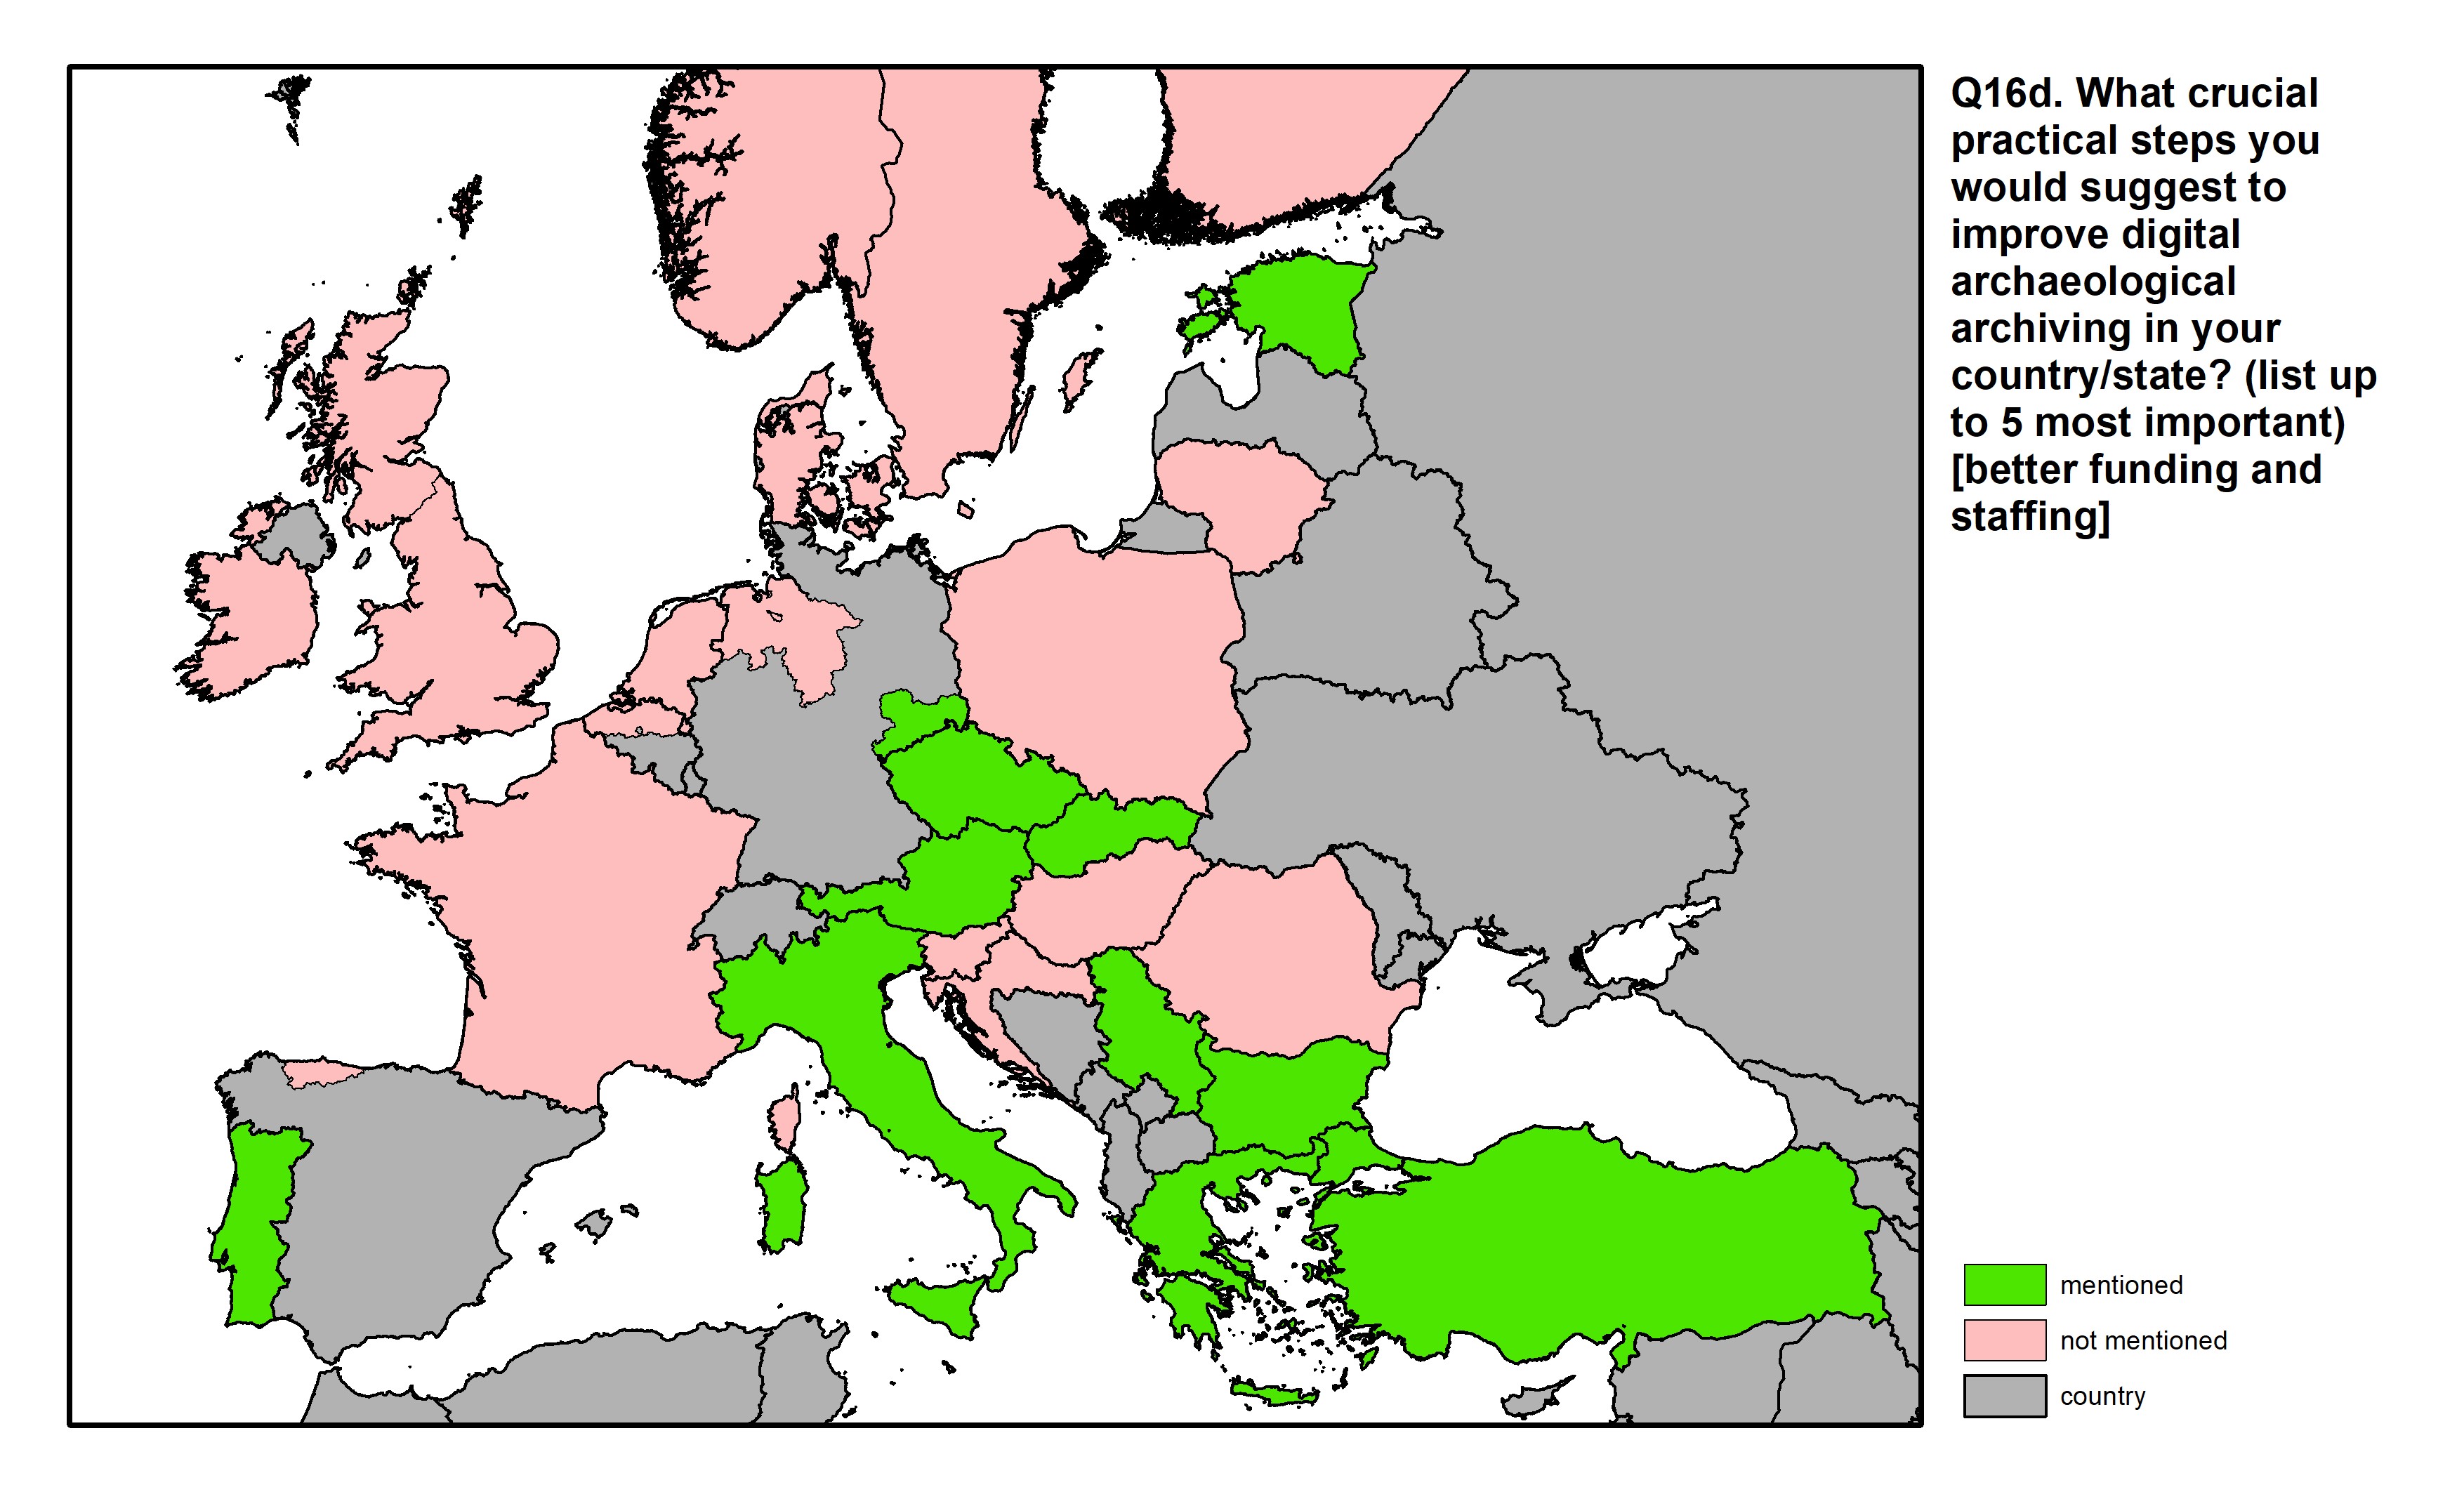 Figure 59: a map of Europe showing countries and regions in colour based on response rates to the survey question.